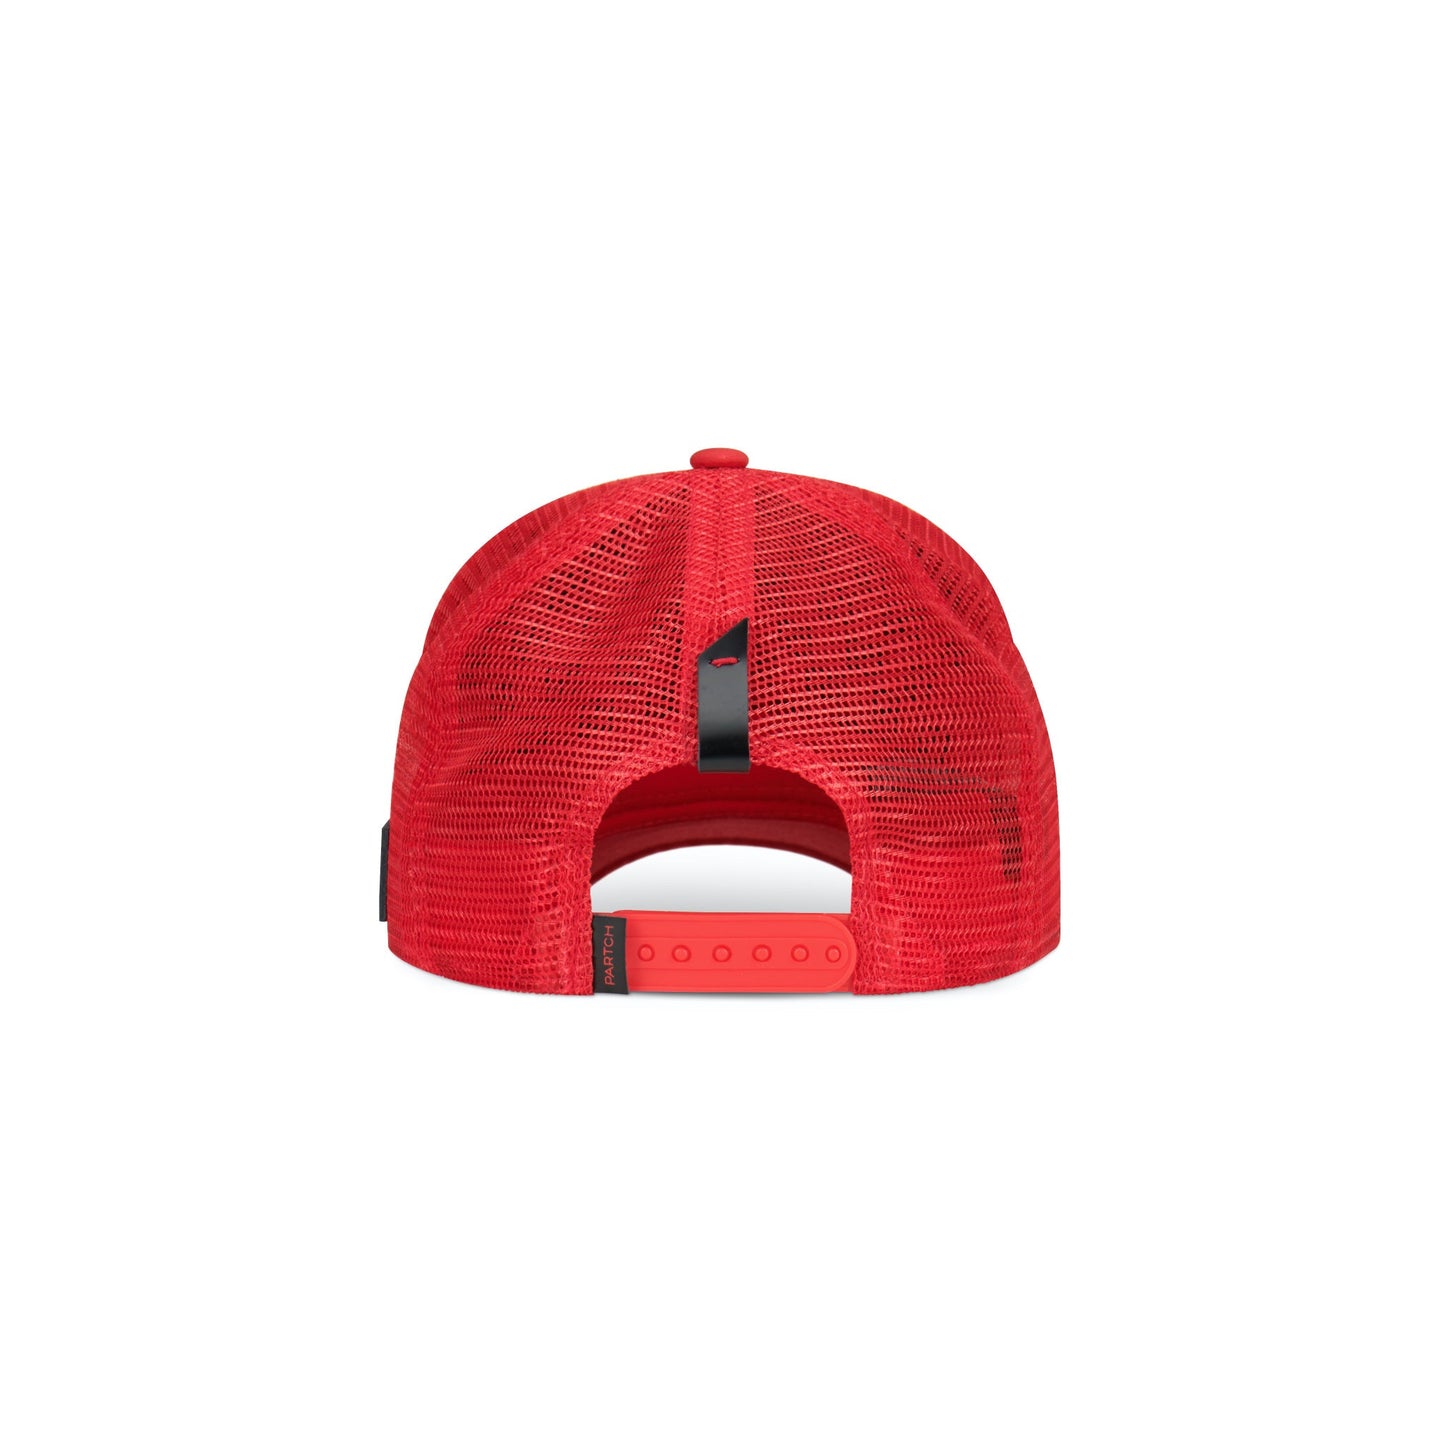 Red Front Logomania Trucker Hat & Caps by Partch | Features PARTCH-Clip interchangeable Art patch made in Aluminum High Purity